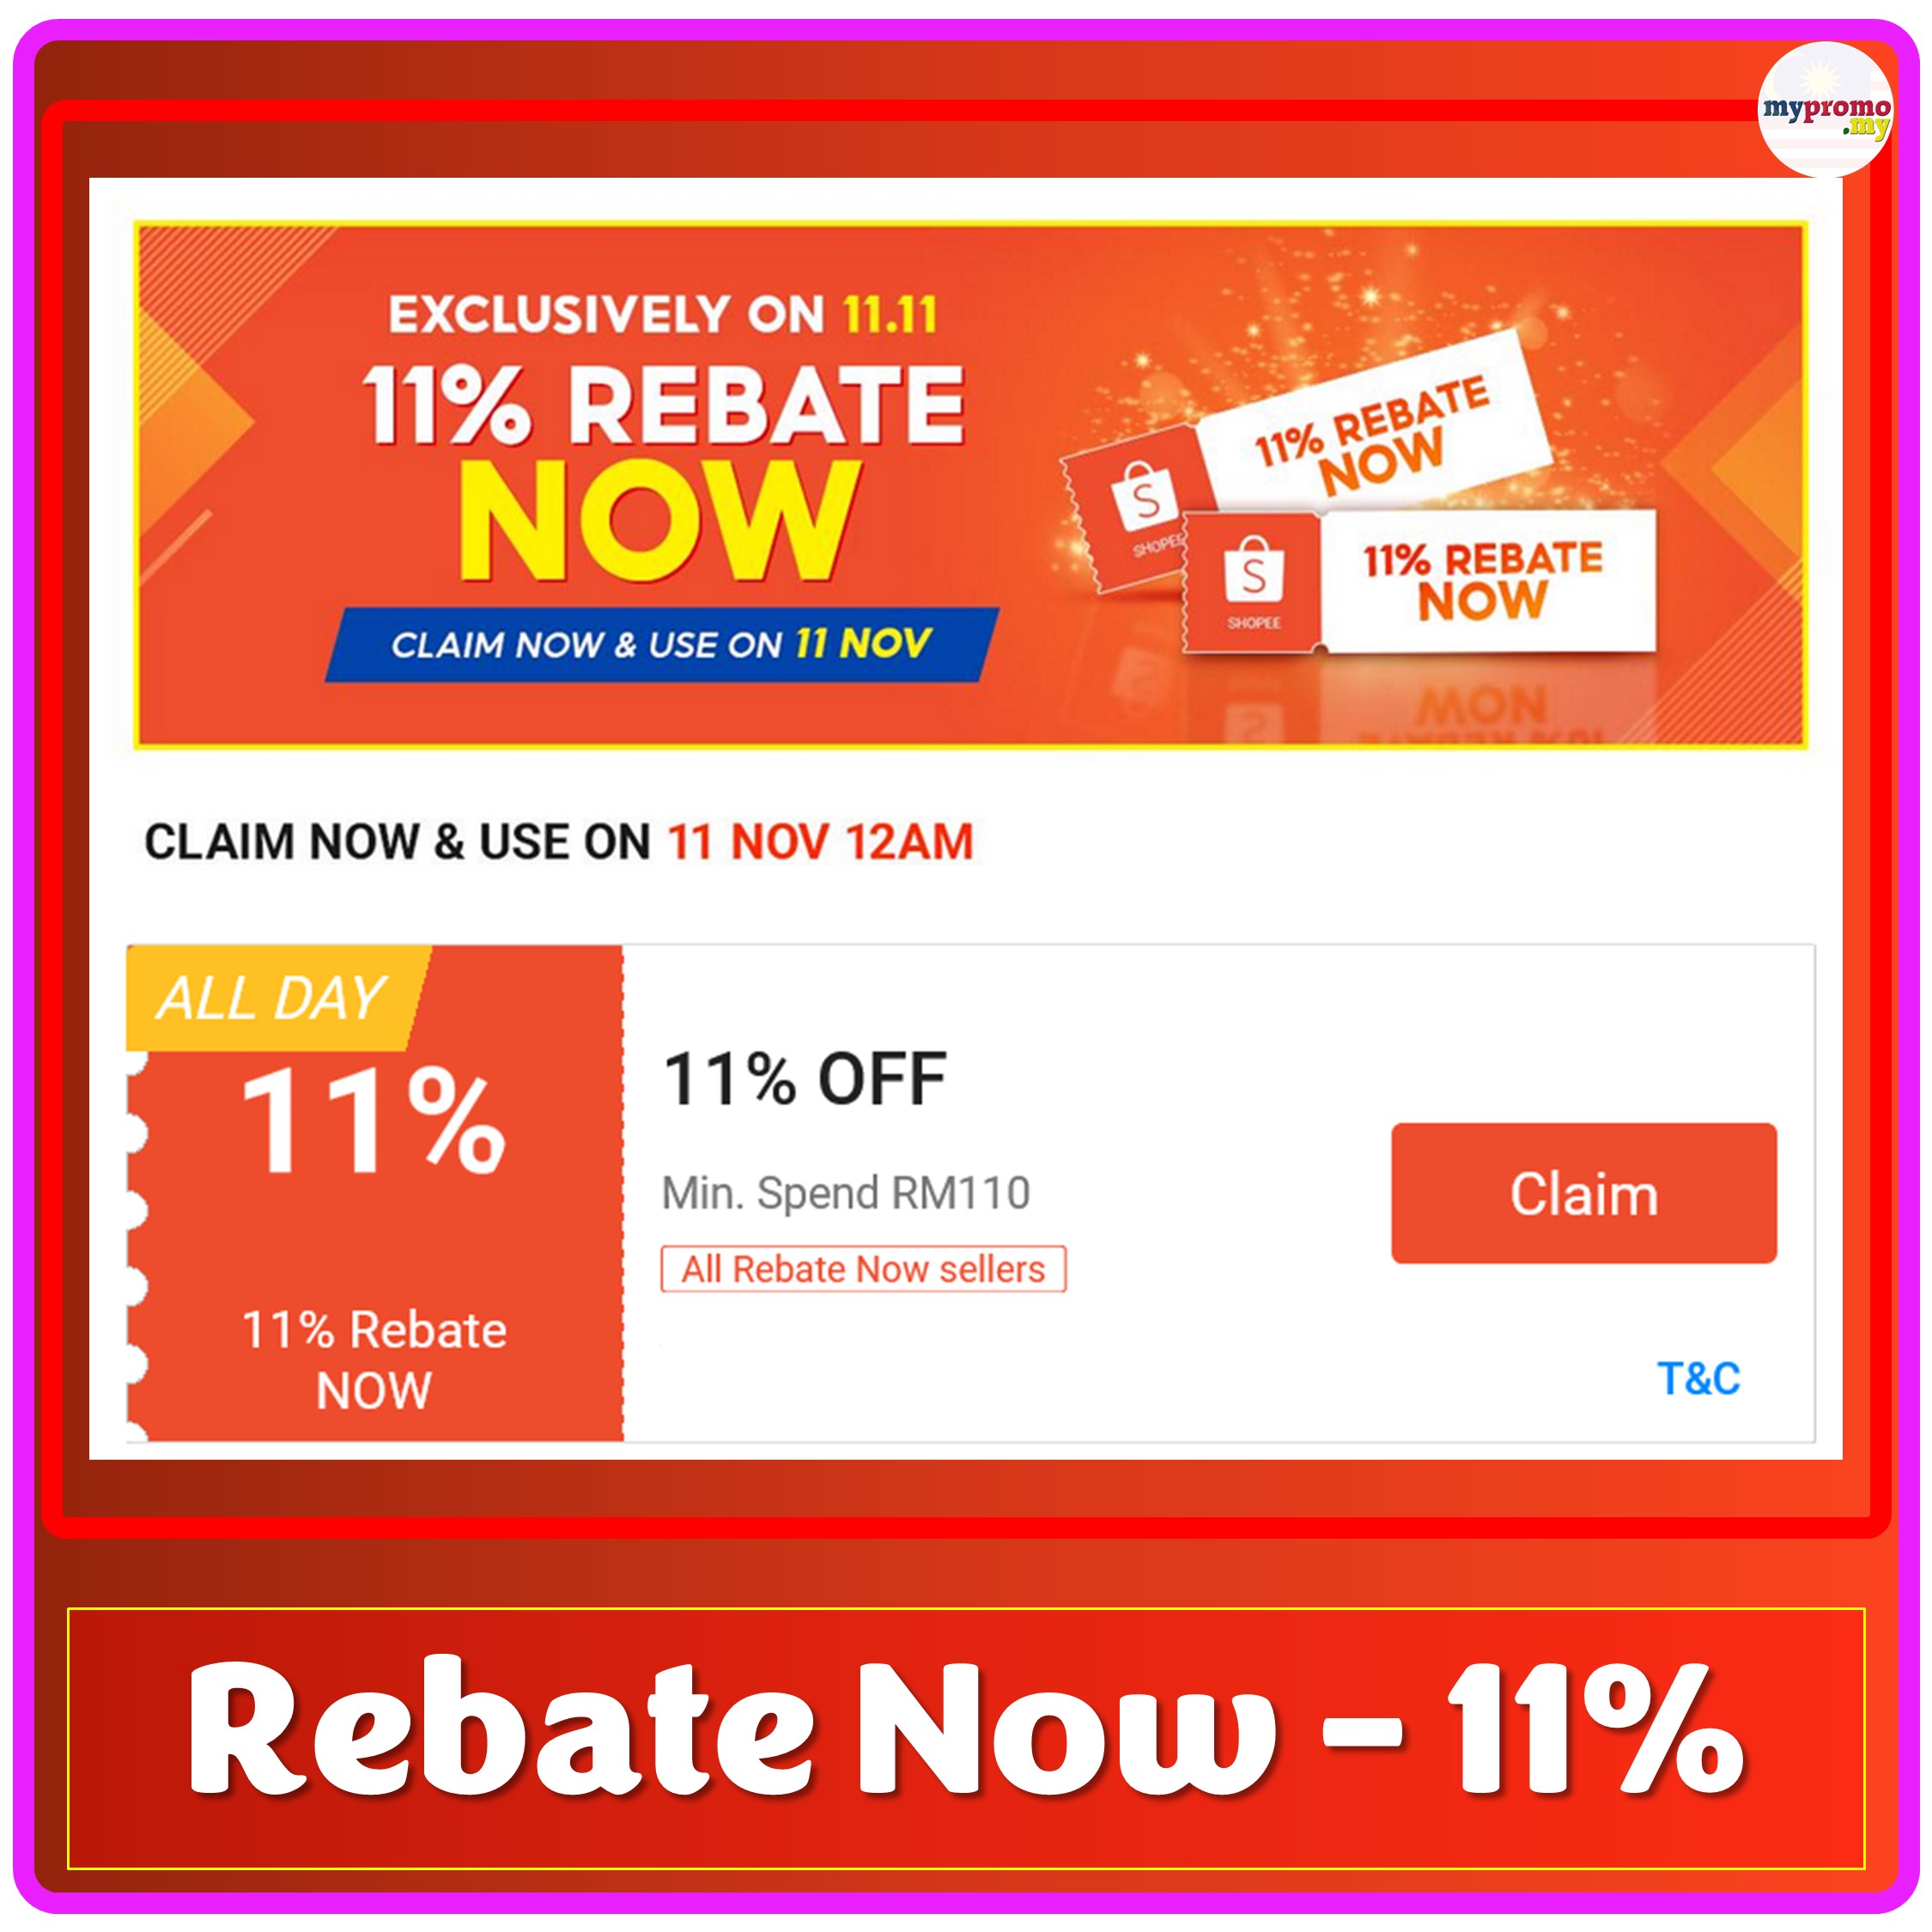 shopee-11-11-rebate-now-at-11-off-2023-mypromo-my